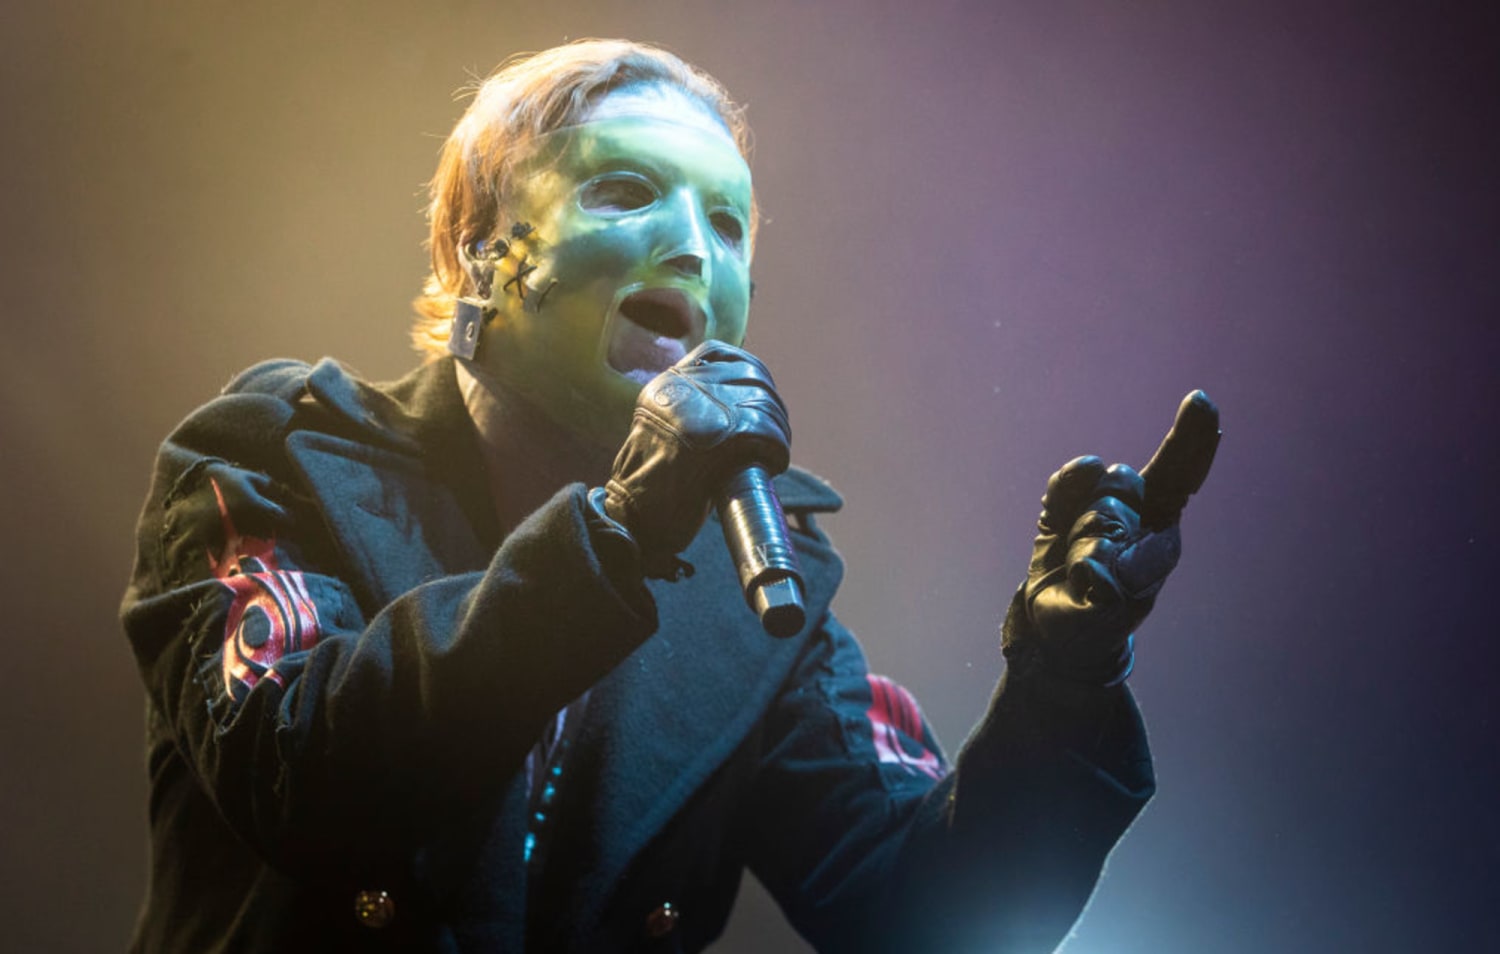 Slipknot to launch online edition of signature event Knotfest